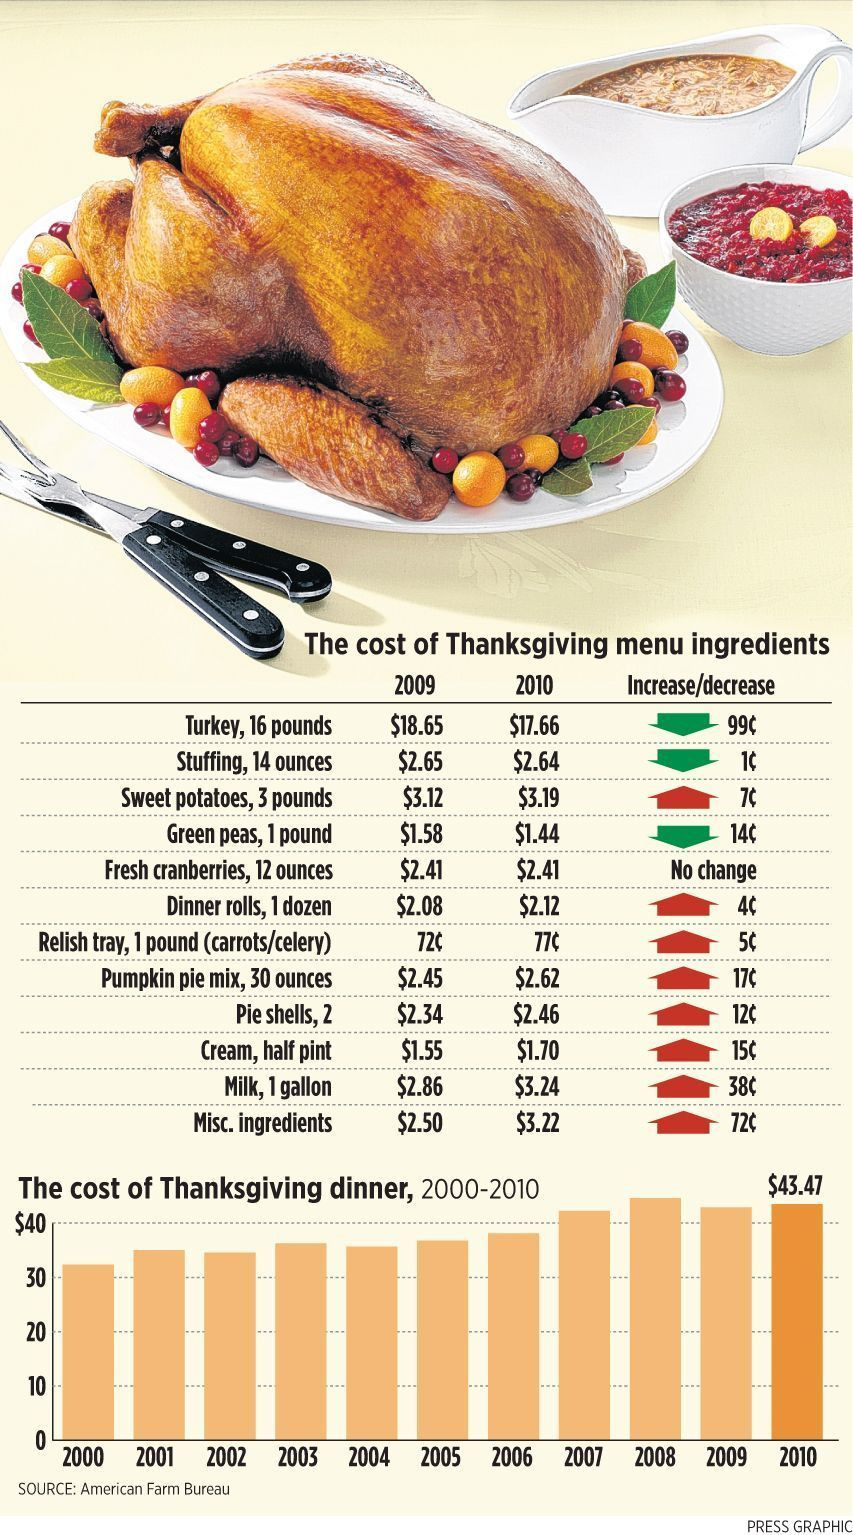 Cub Foods Thanksgiving Dinners
 Find out the cost of a 2010 Thanksgiving turkey dinner for